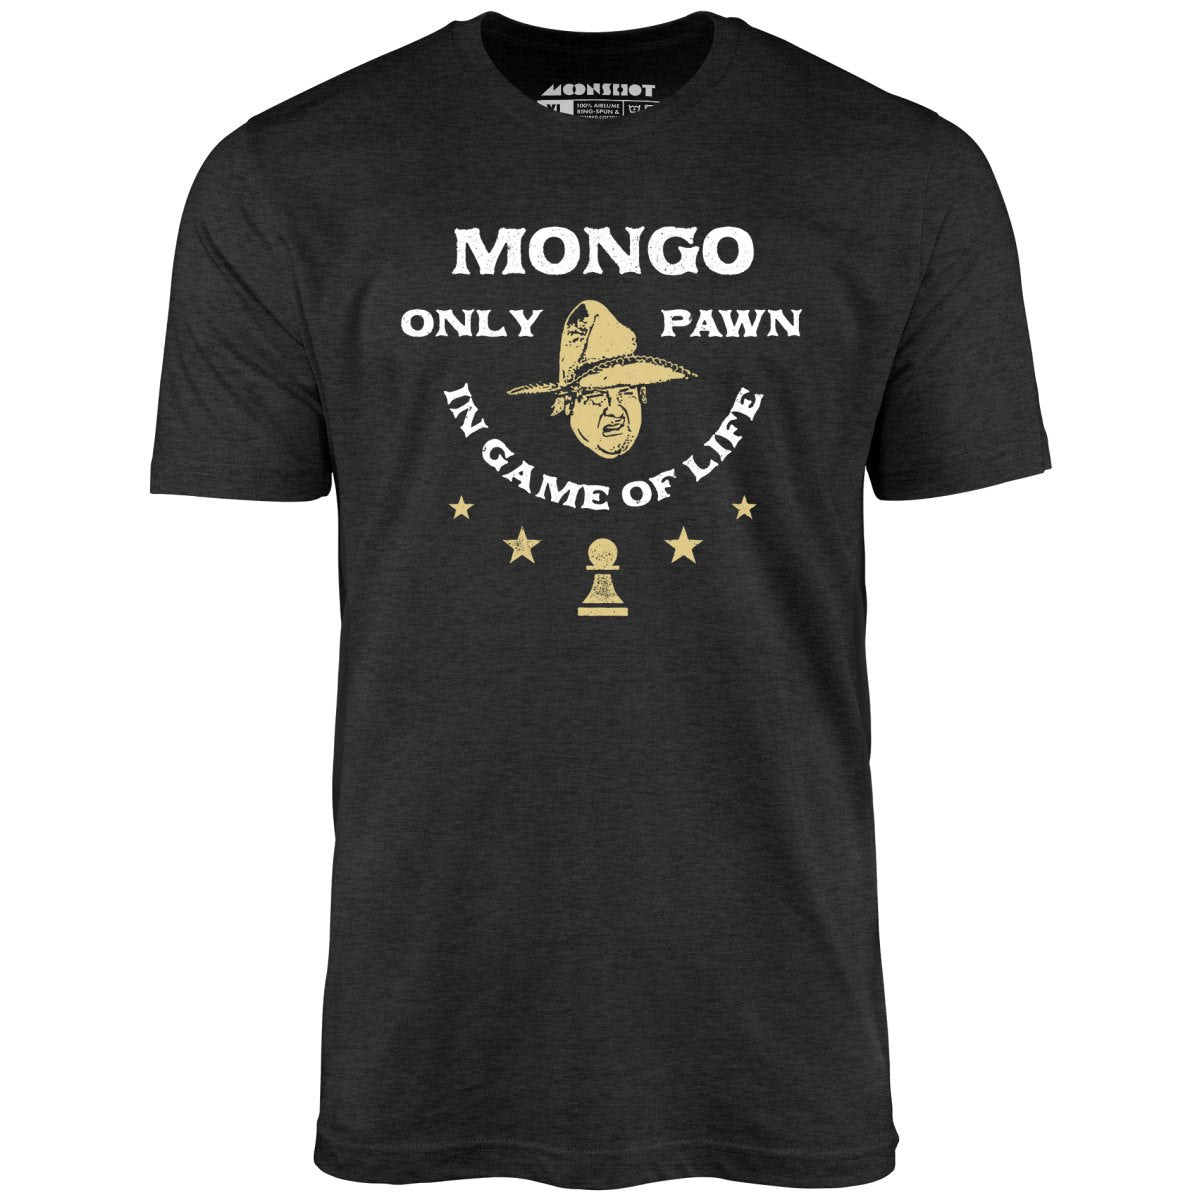 Mongo Only Pawn in Game of Life - Unisex T-Shirt